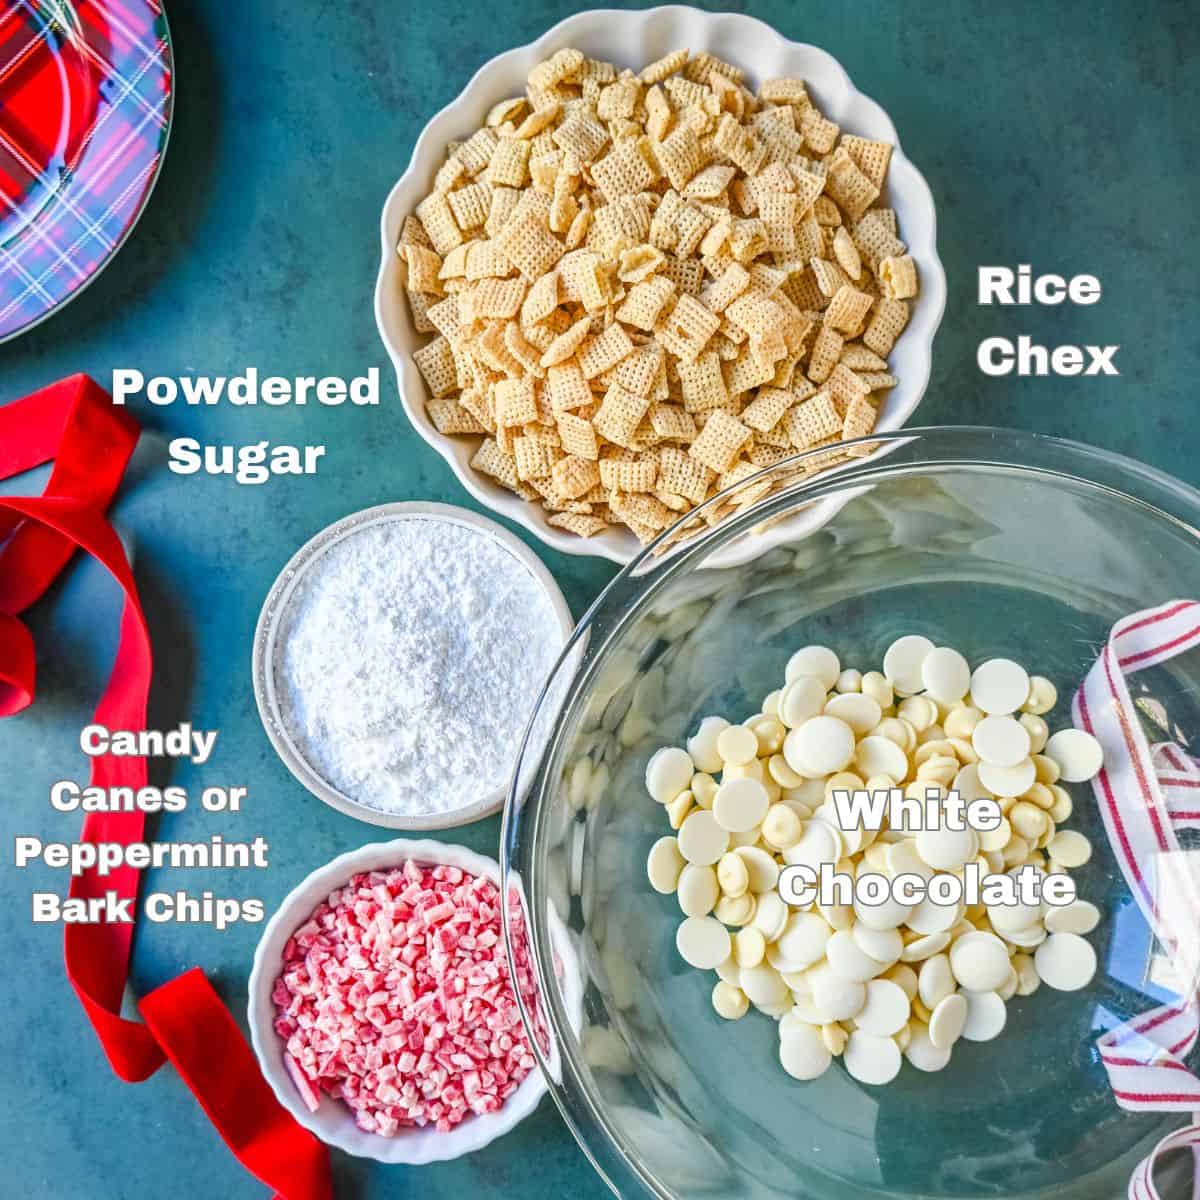 Peppermint Puppy Chow or Peppermint Muddy Buddies Ingredients